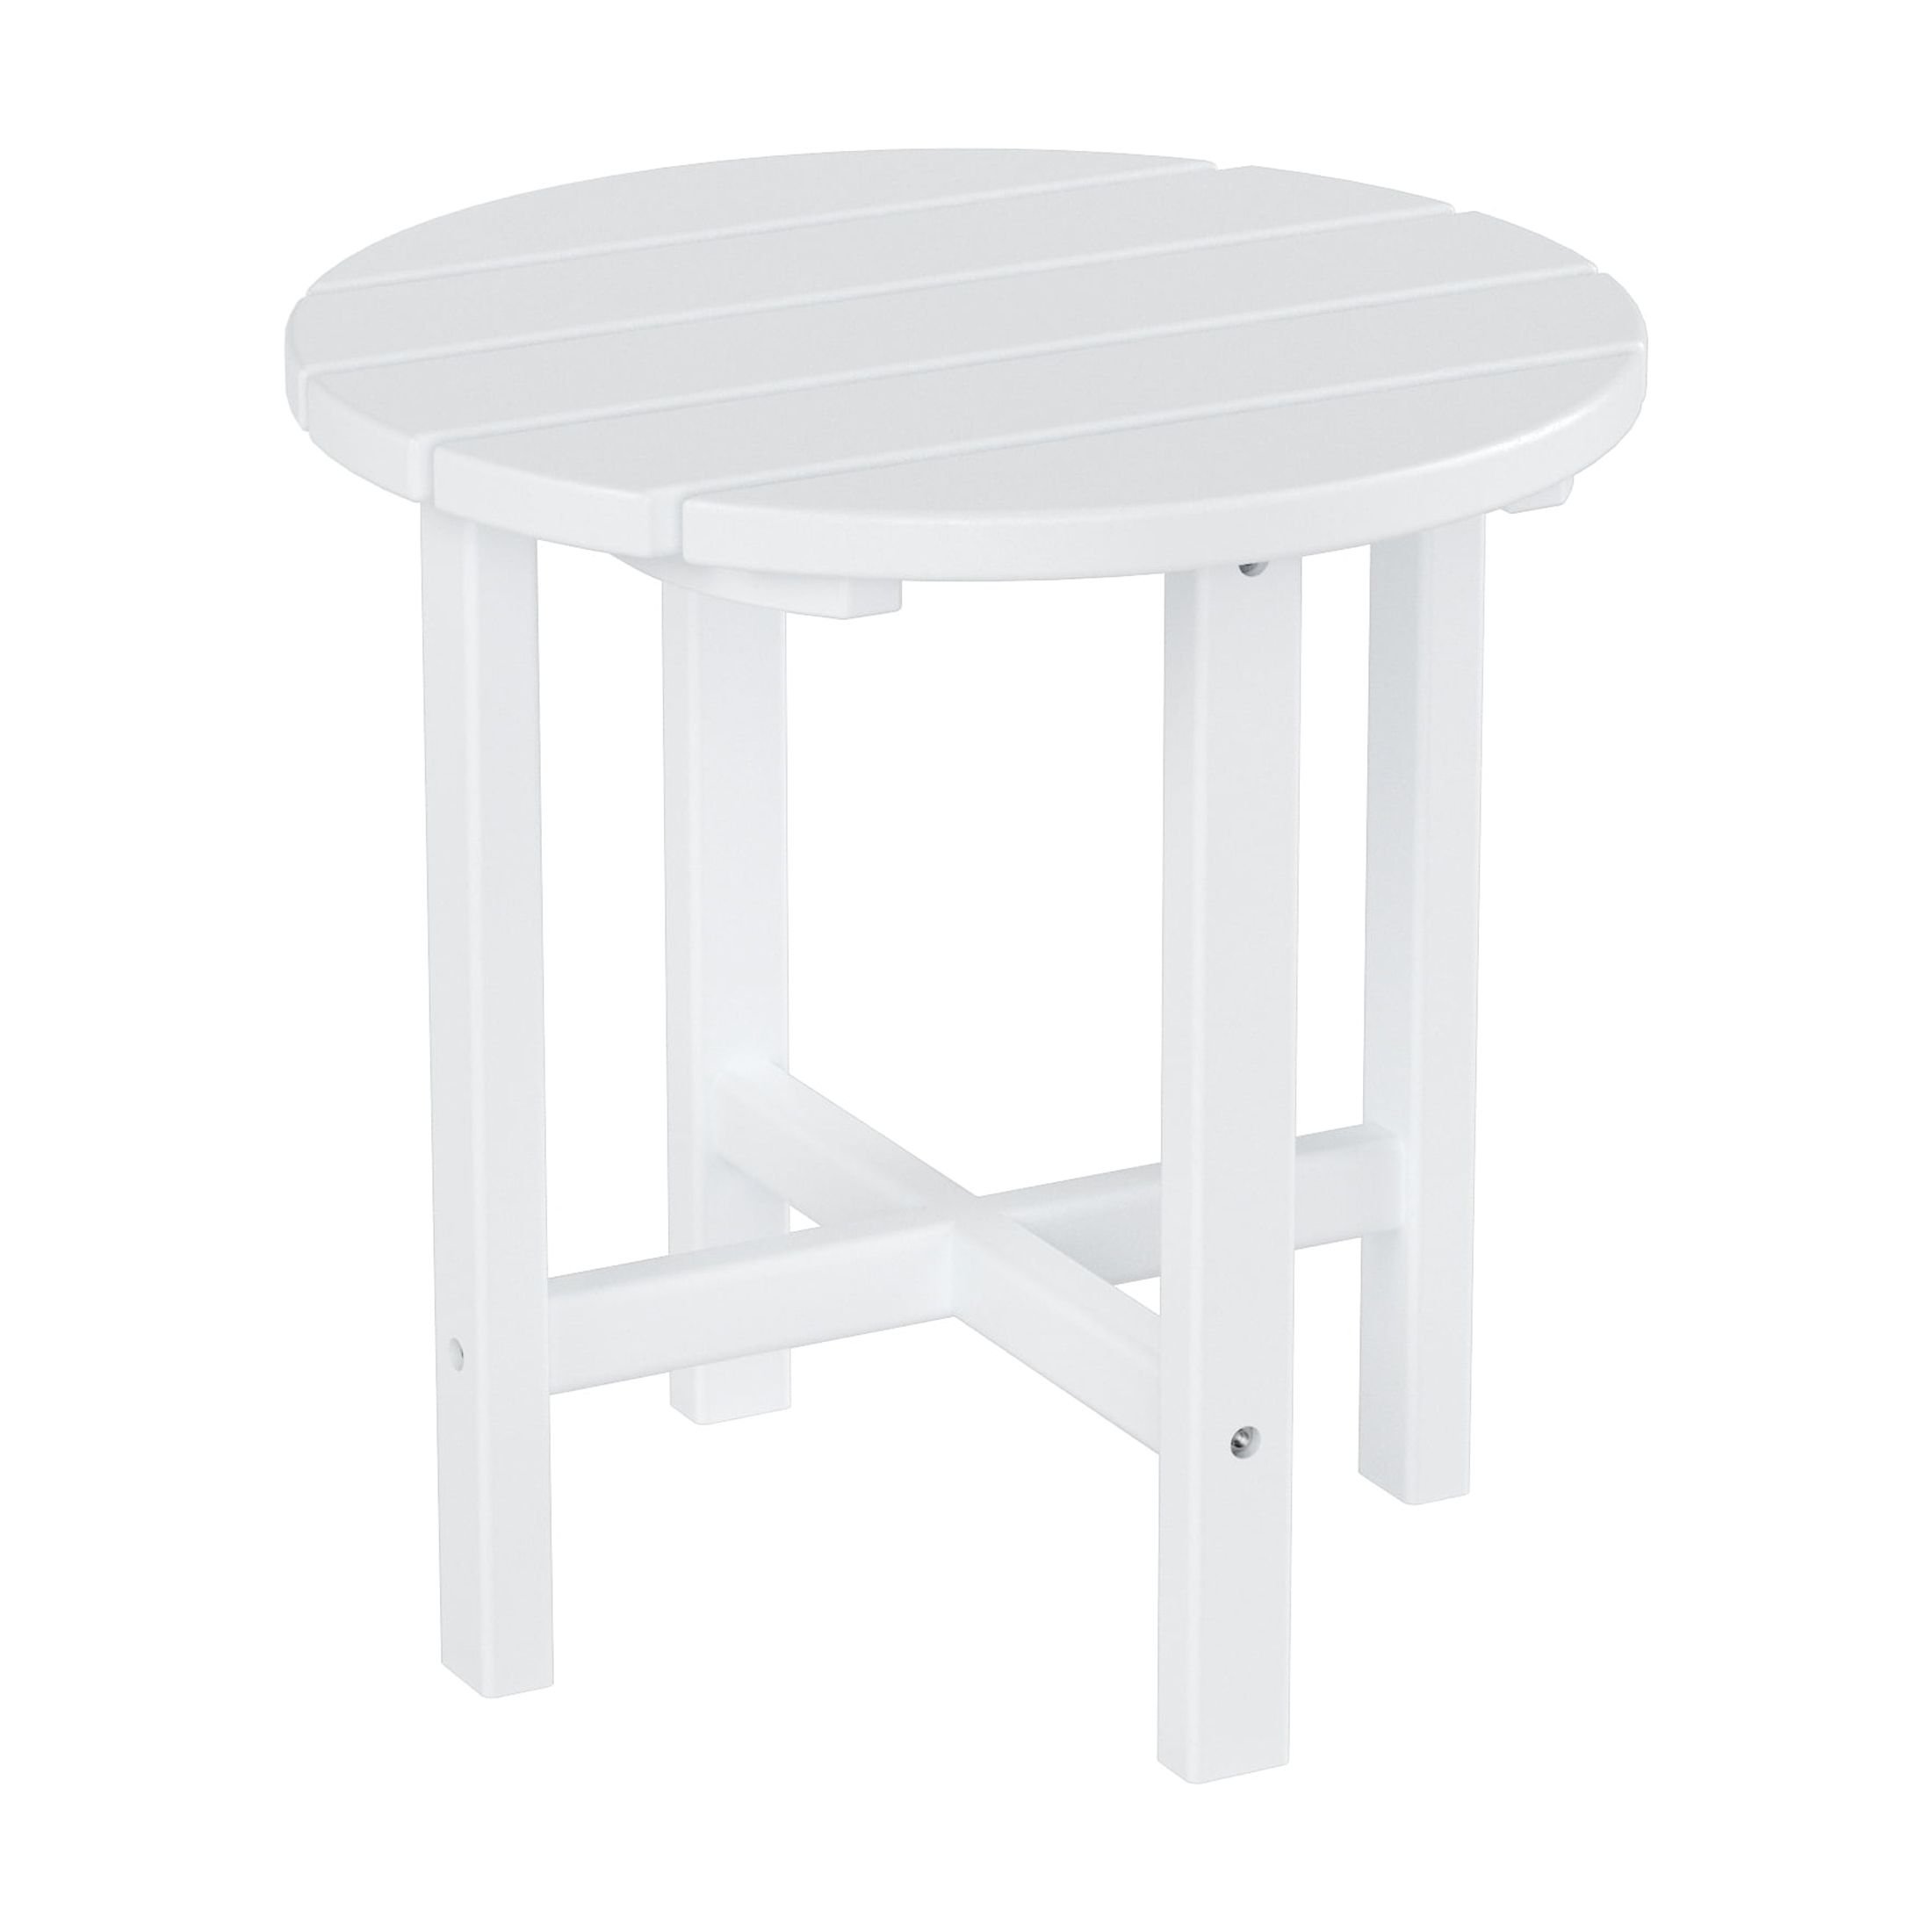 GARDEN 2-Piece Set Classic Plastic Porch Rocking Chair with Round Side Table Included, White - image 3 of 8